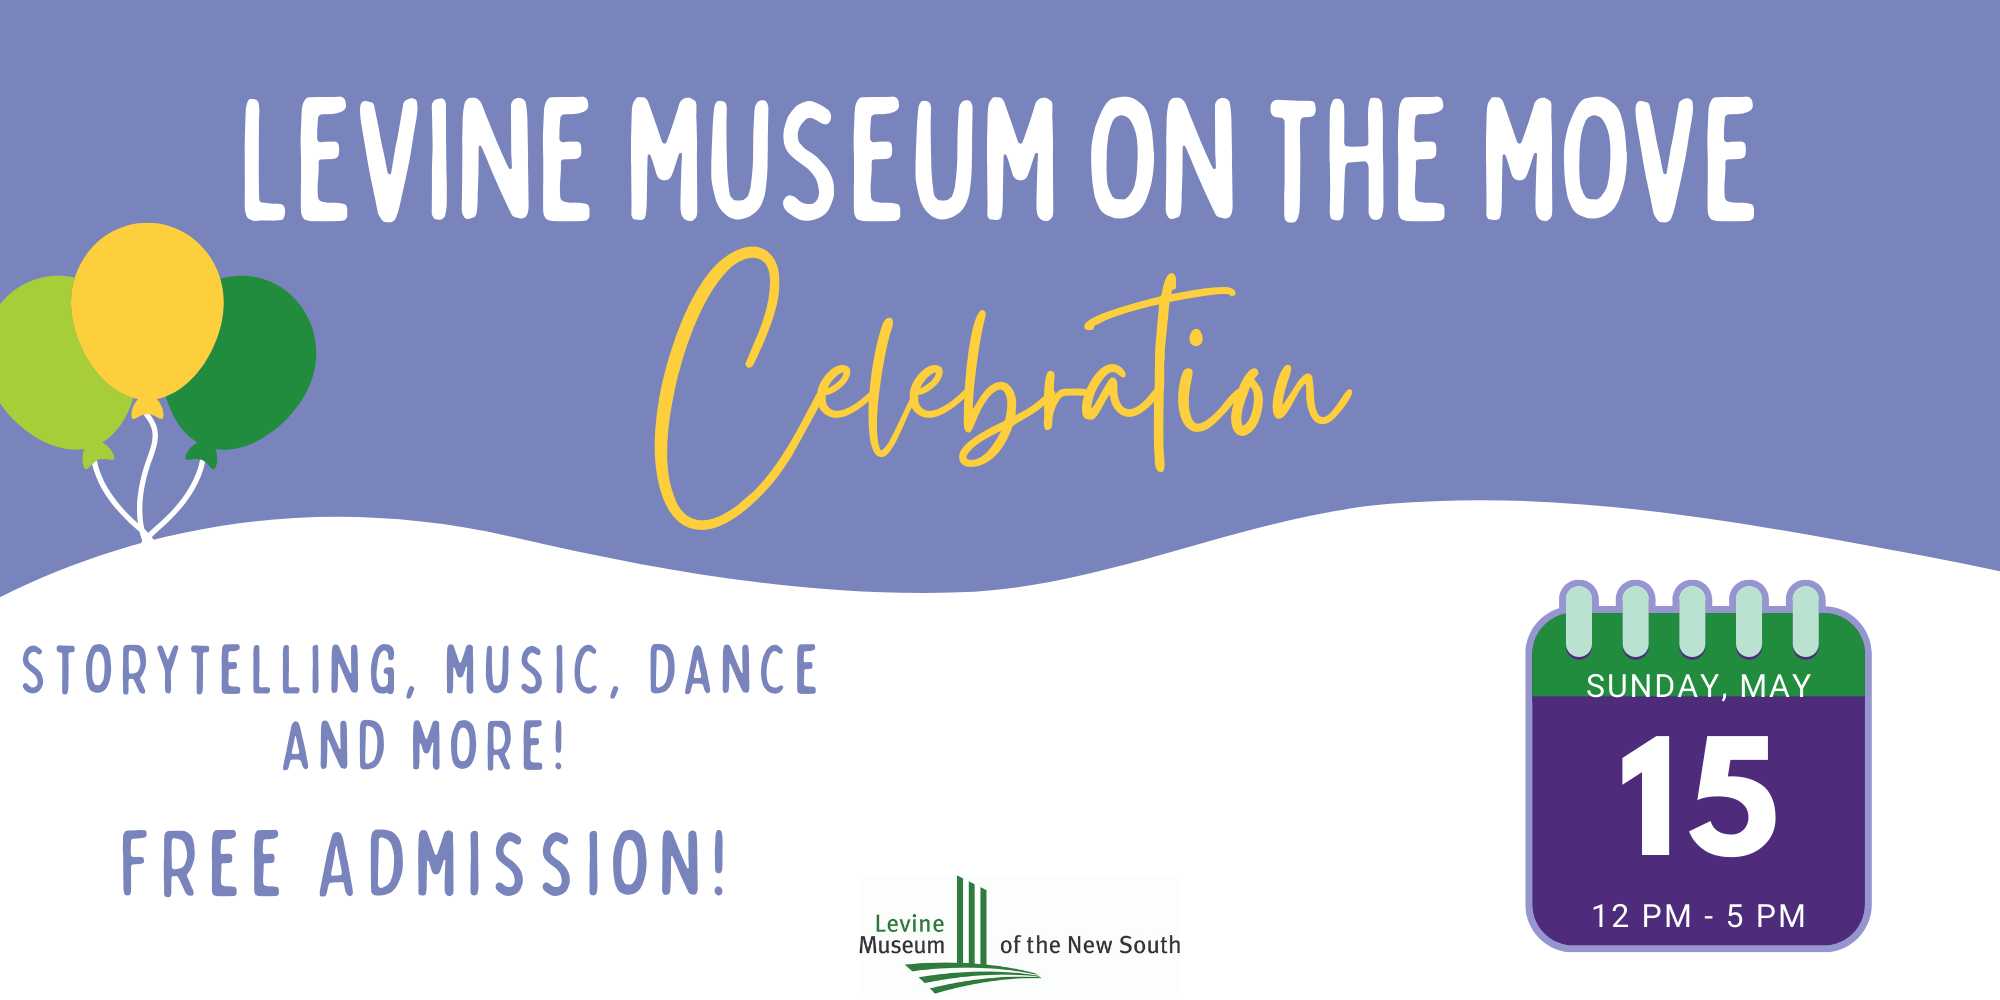 Levine Museum of the New South Museum on the Move Celebration Event Image